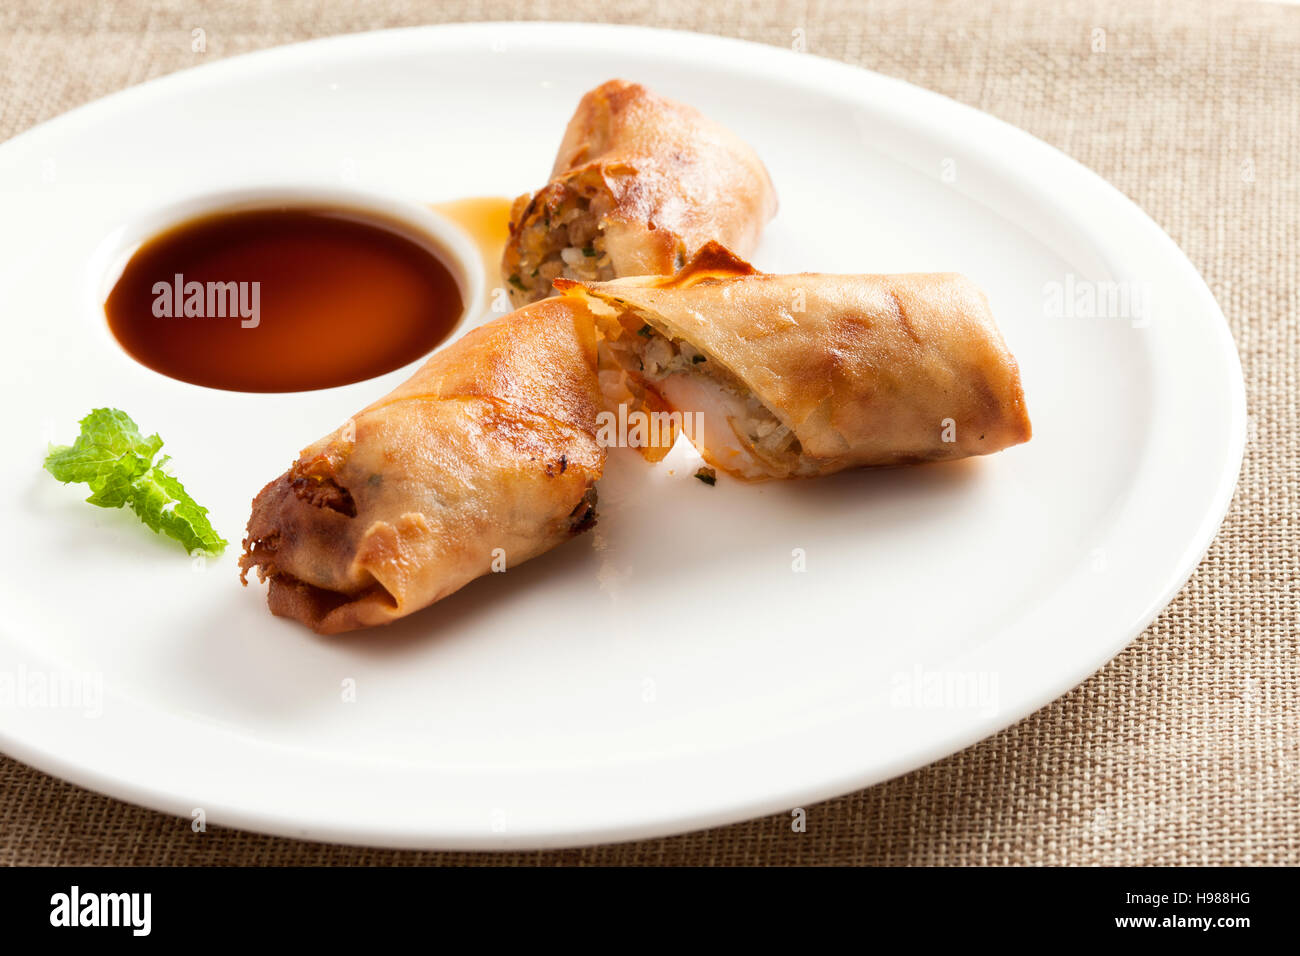 Fried spring rolls with vegetables and shrimps, served on white plate with vinegar Stock Photo